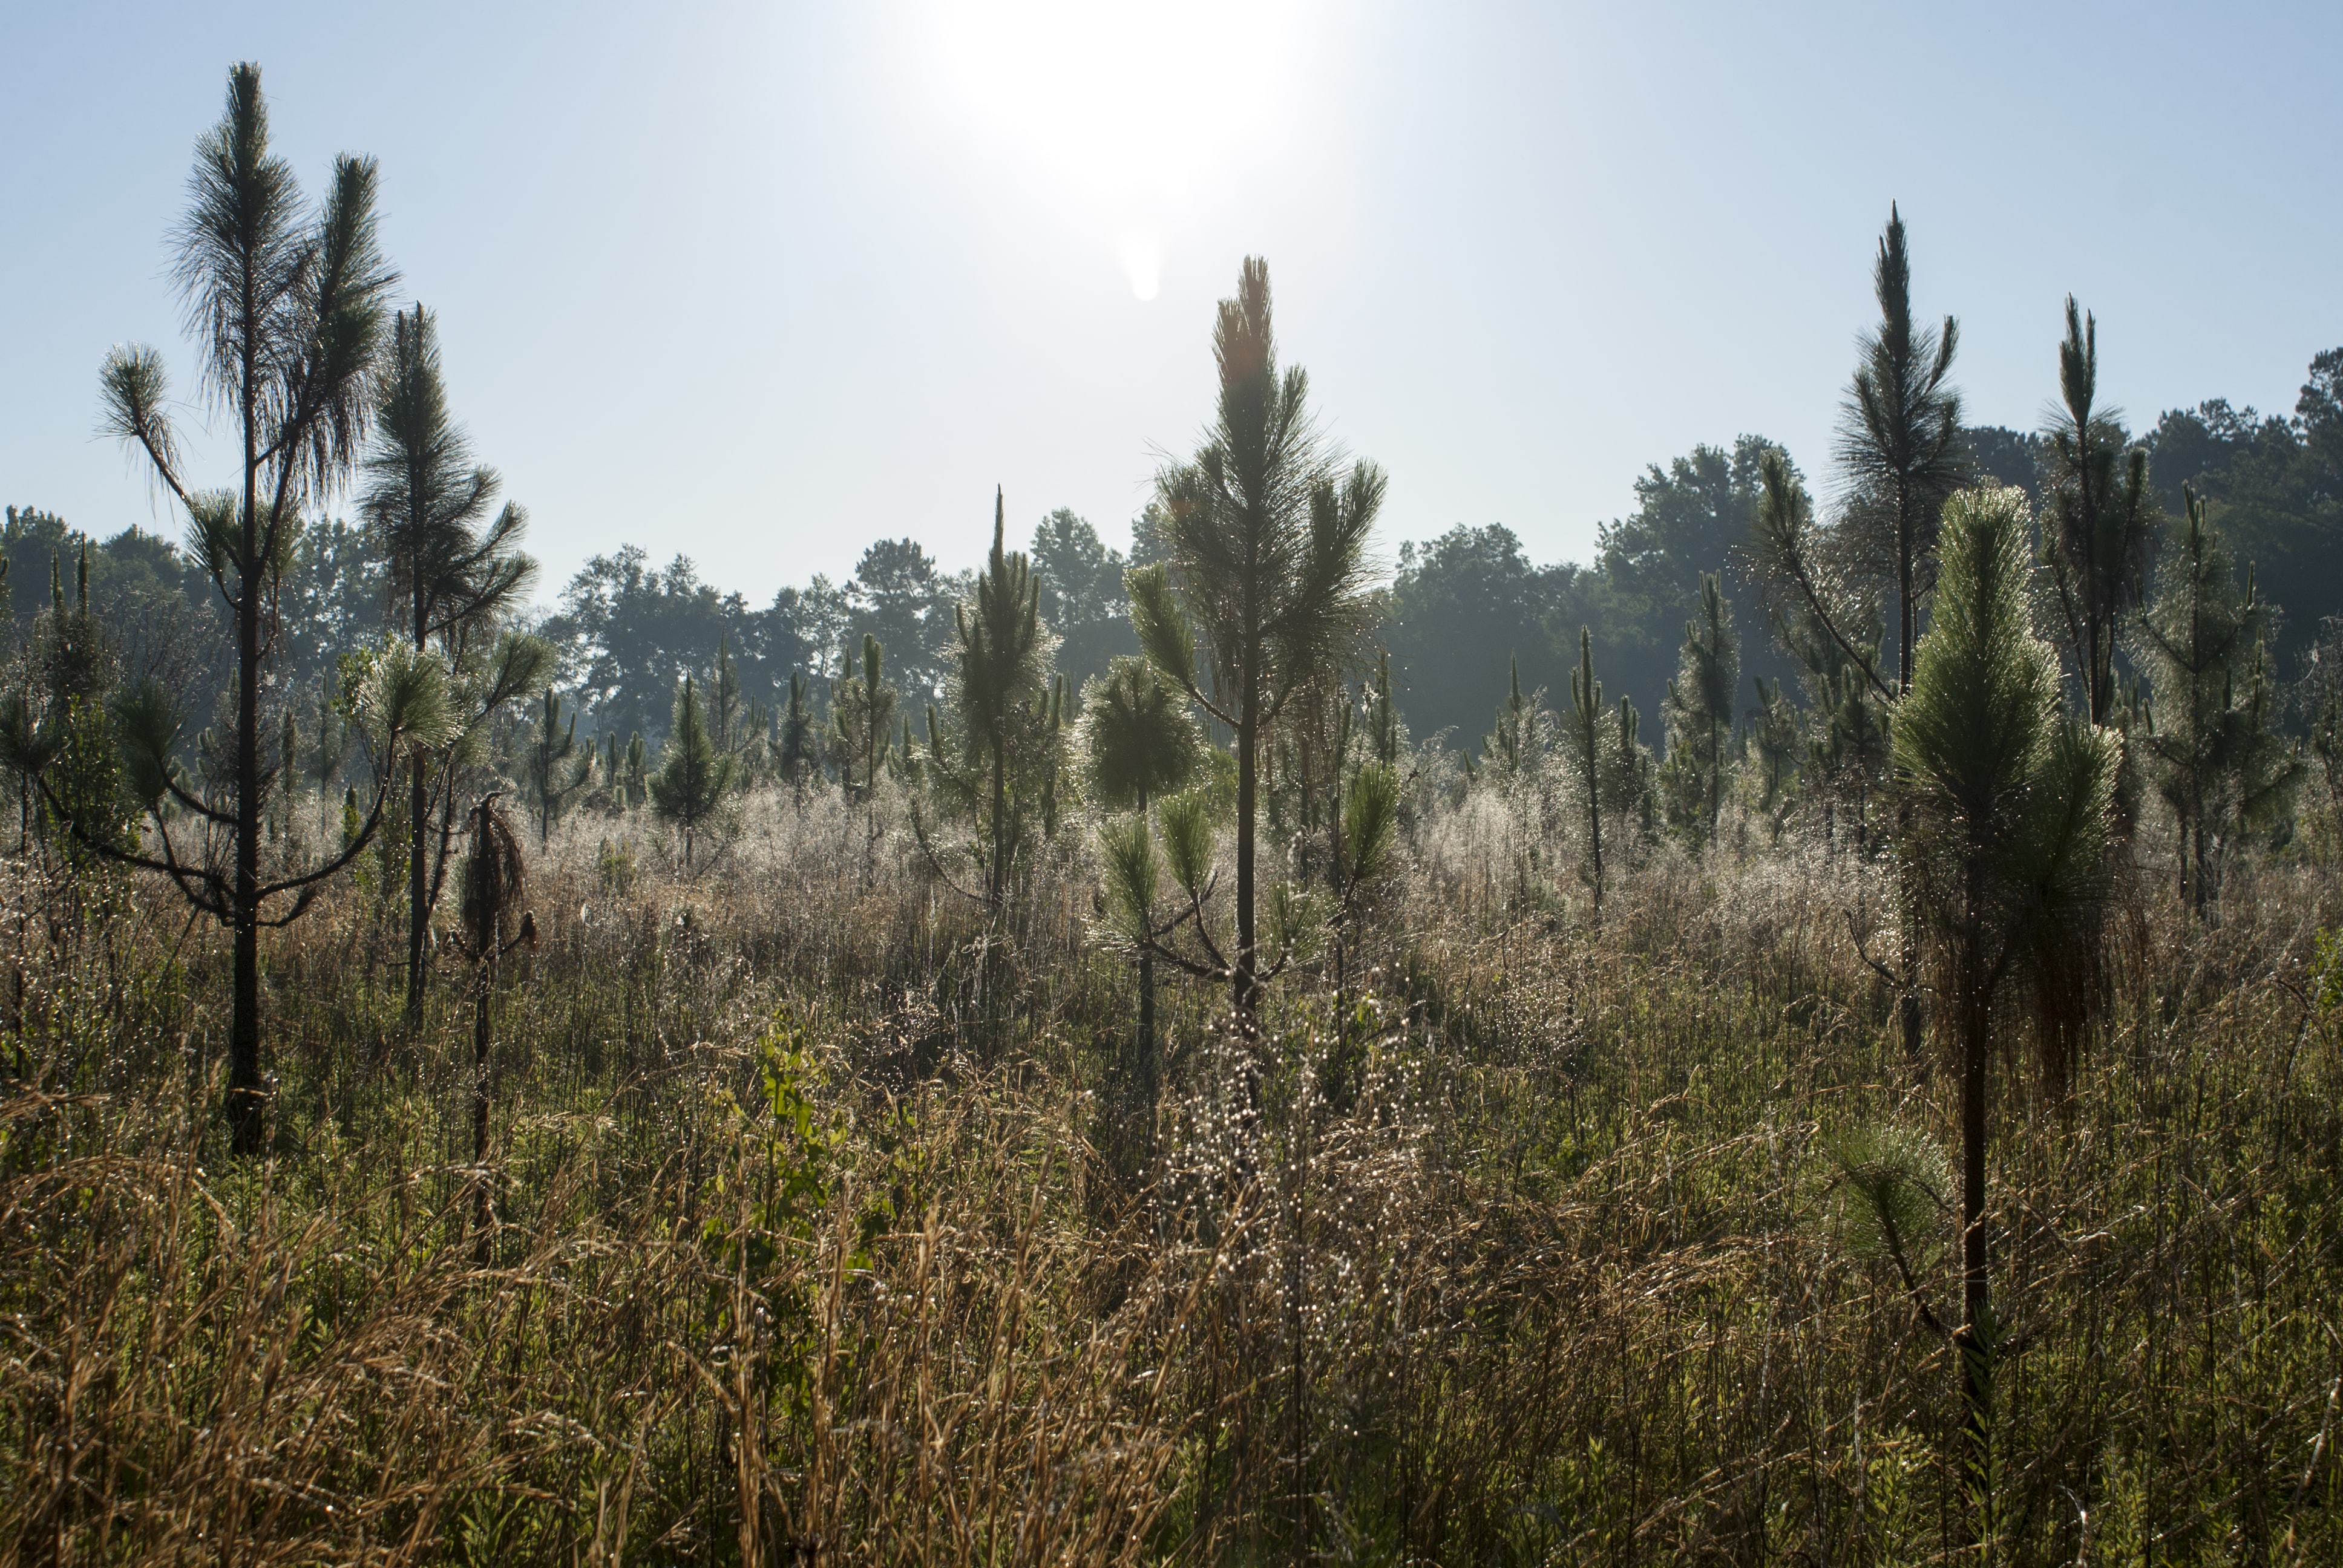 Immature Longleaf Pine stand in rows along a morning grassy field. The sun is rising. 